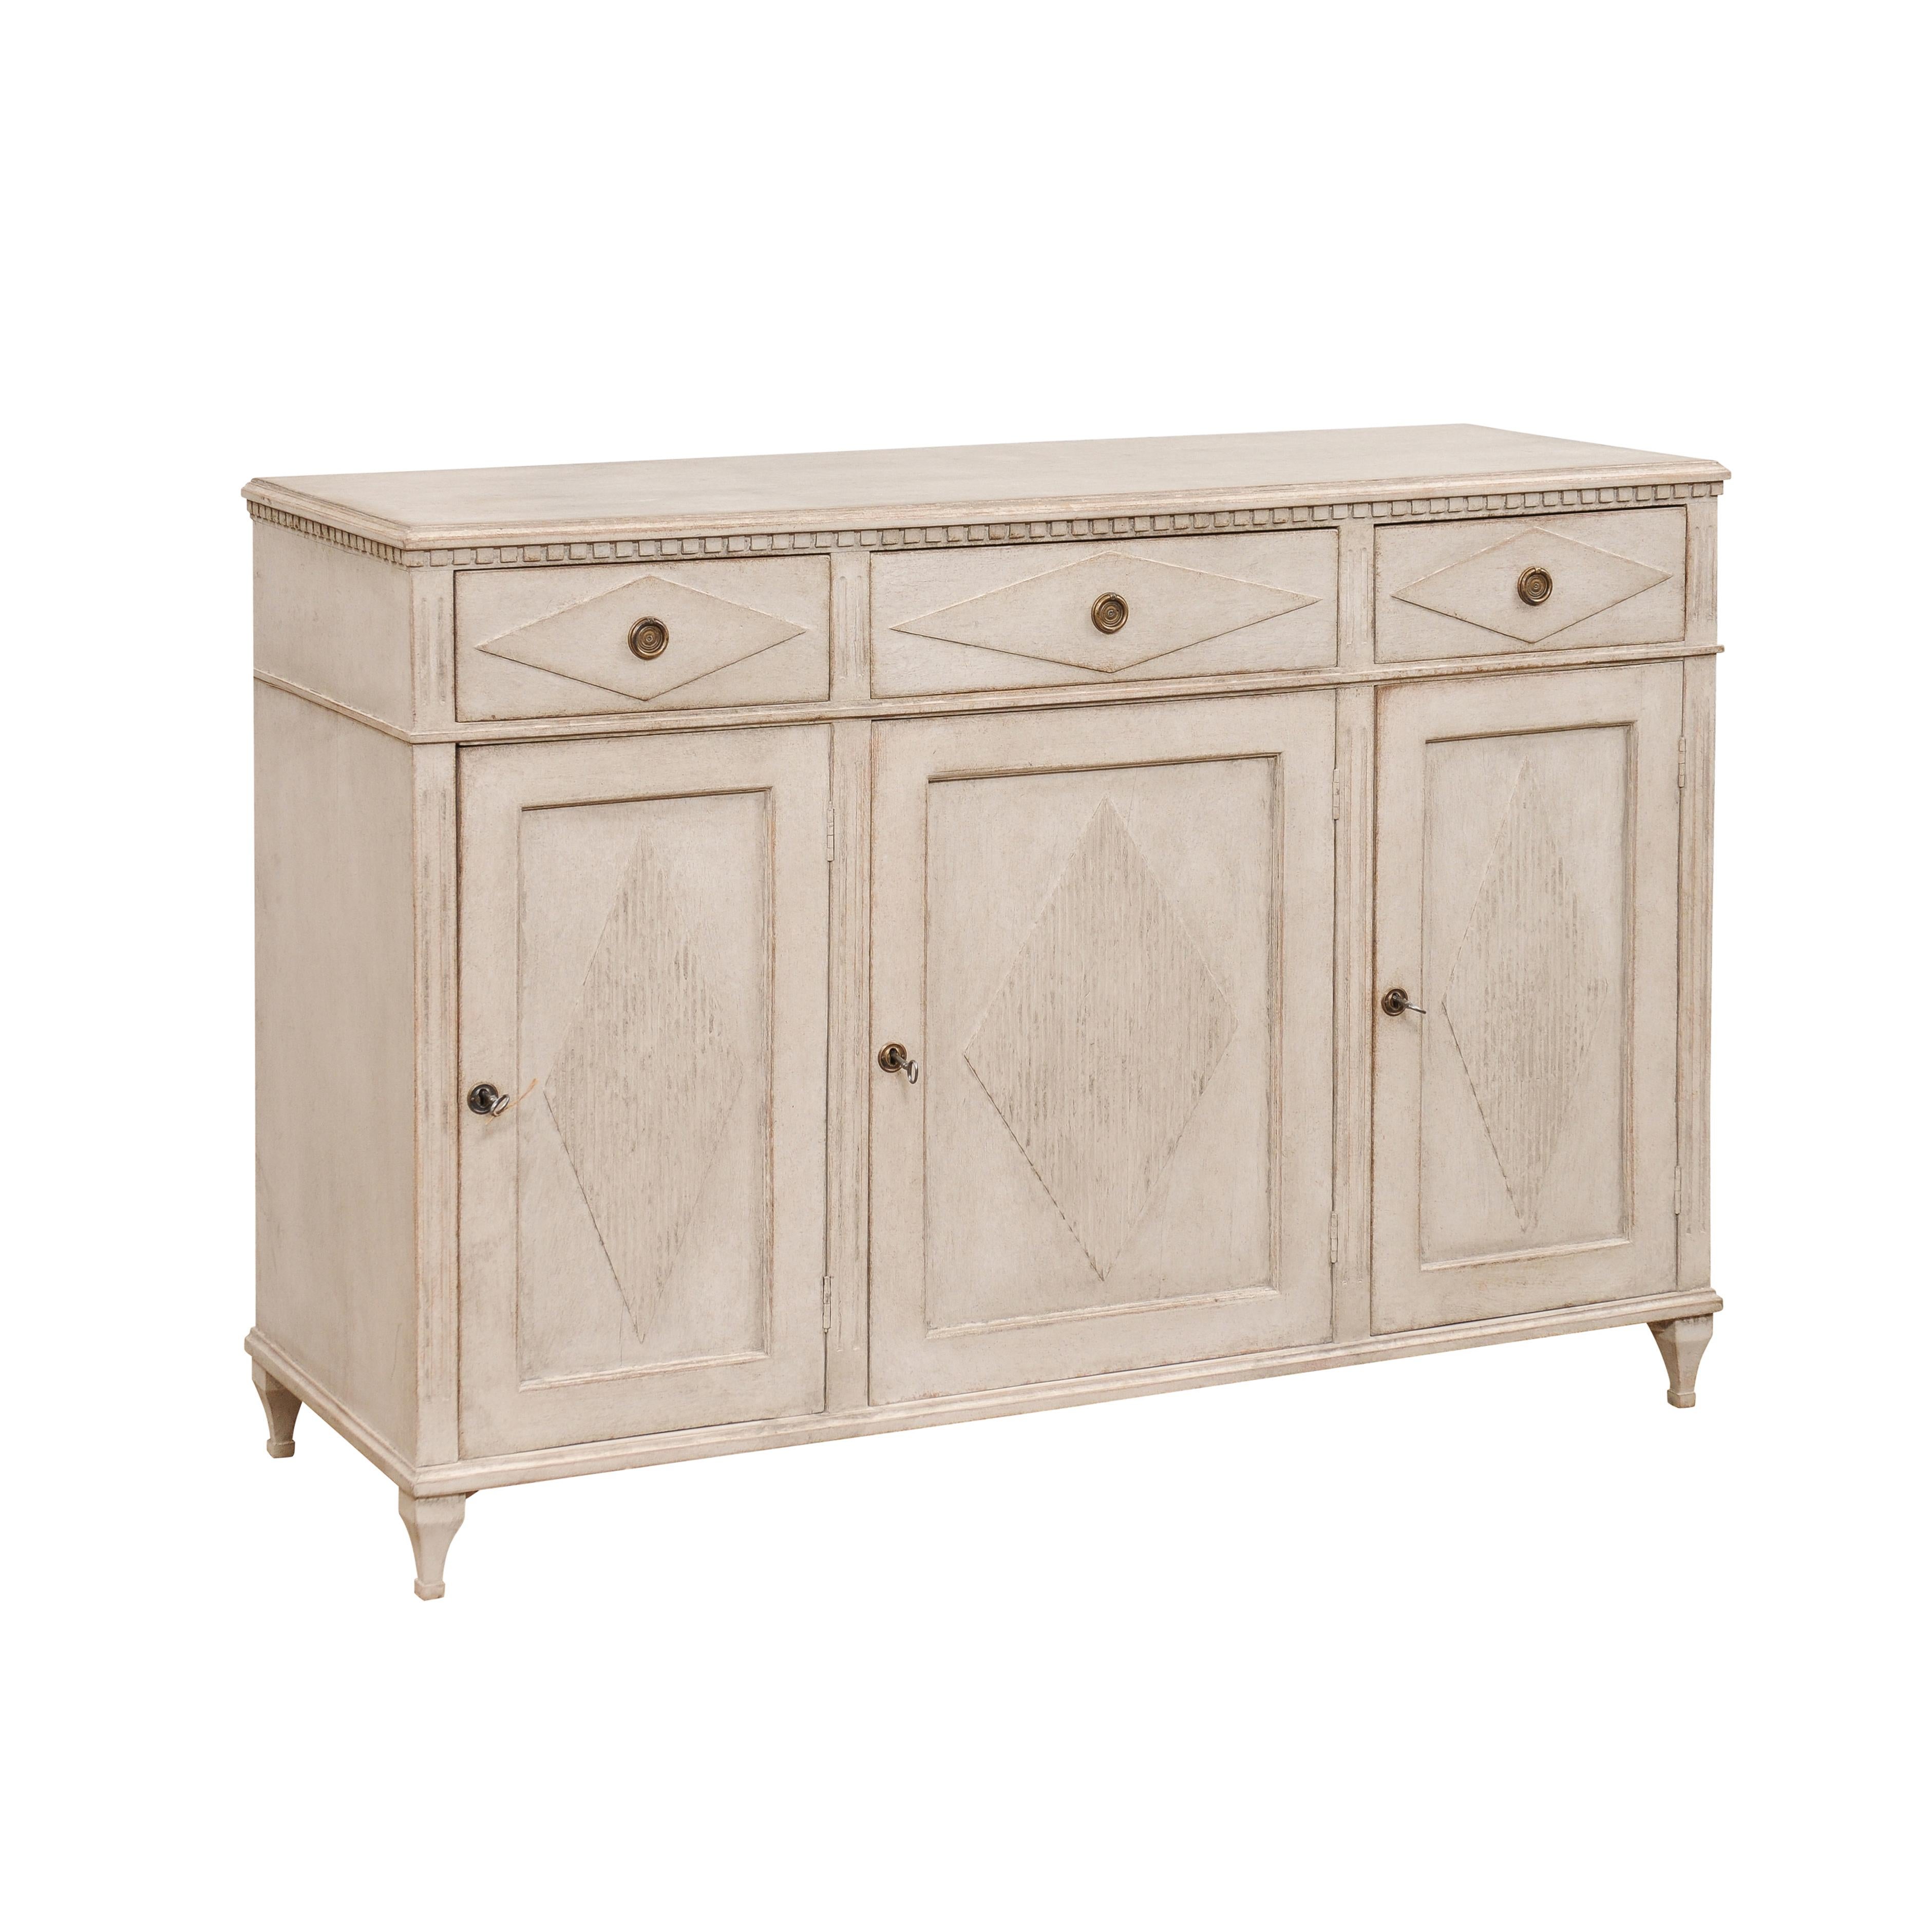 A Swedish Gustavian Style painted wood sideboard circa 1870 with carved dentil molding, three drawers, three doors and carved diamond motifs. Transport yourself to the refined elegance of Swedish Gustavian design with this exquisite painted wood